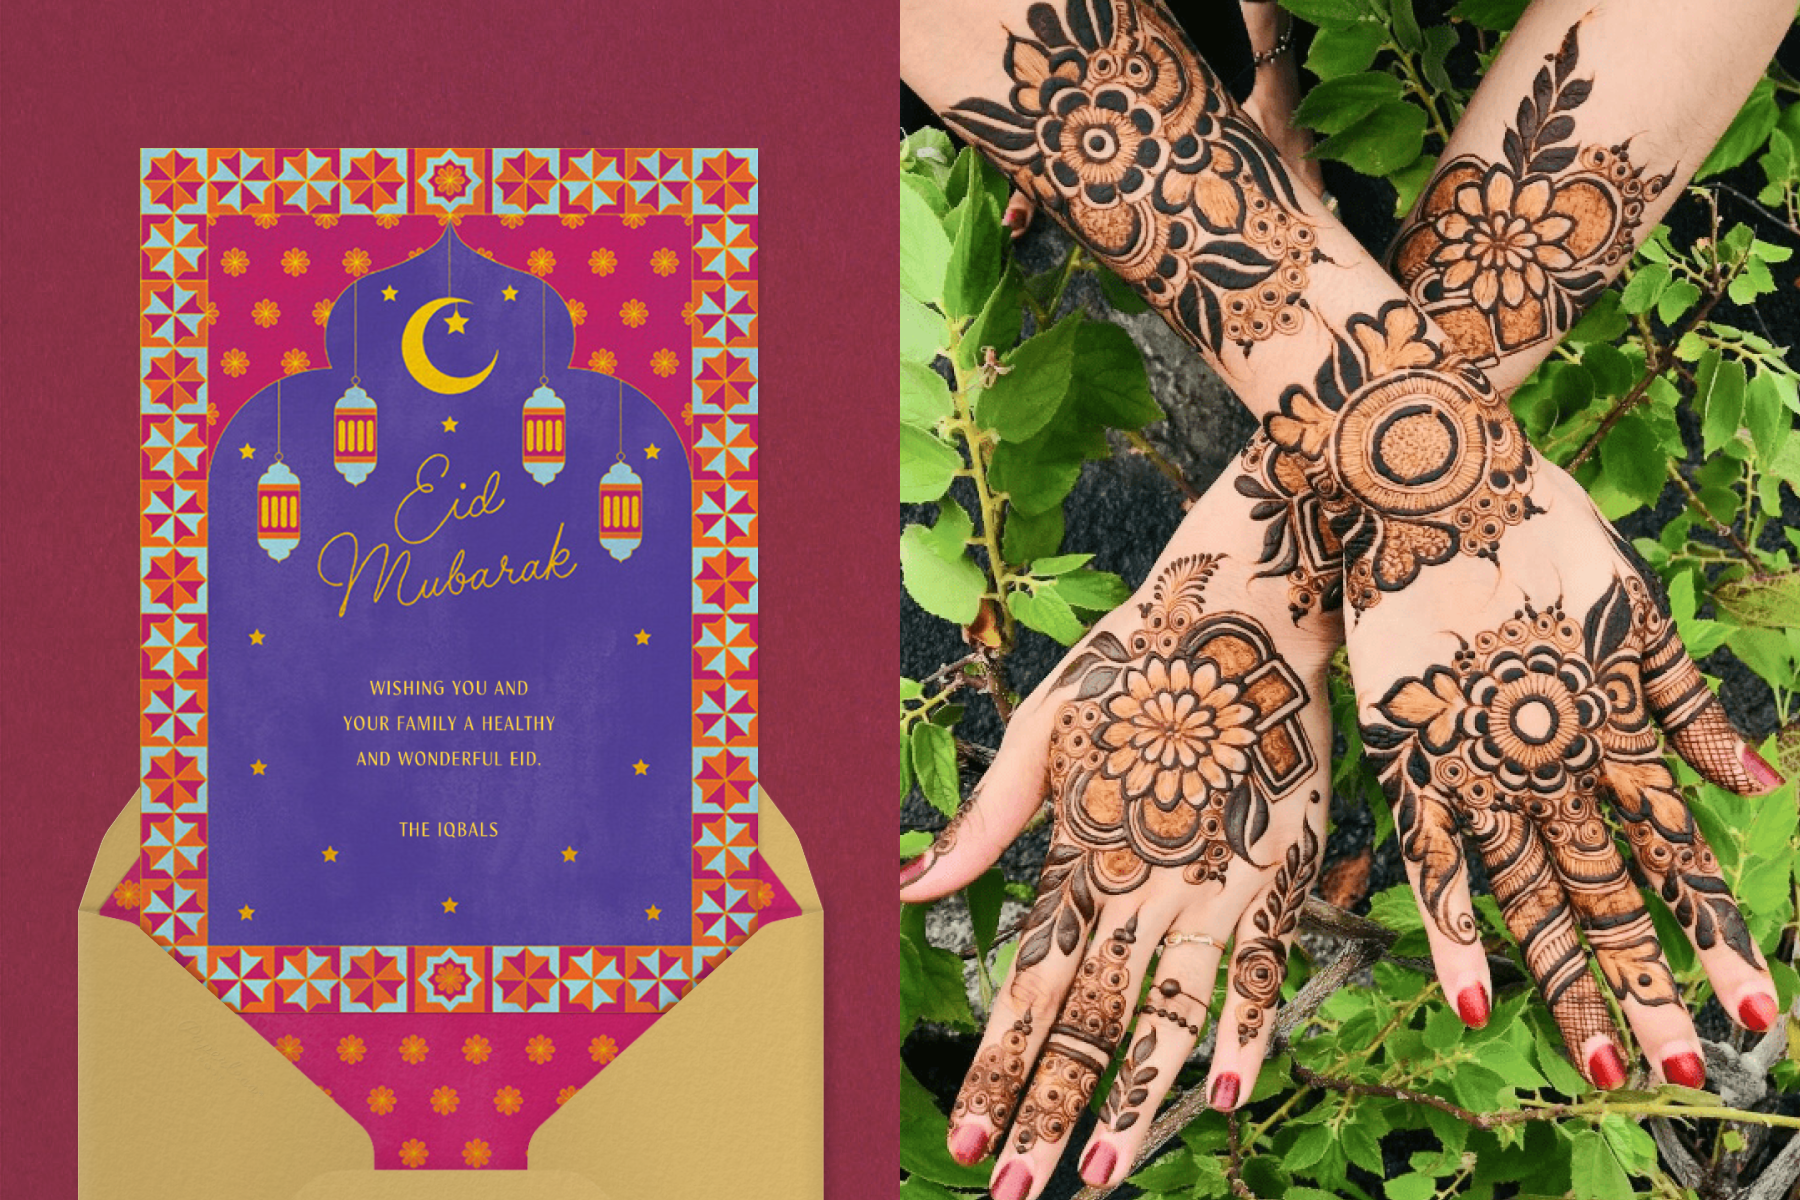 Left: A colorful Eid party invitation with a geometric background and a scene of lanterns and a moon and stars paired with a matching envelope; right: a woman's hands intricately decorated with henna with a leafy background.